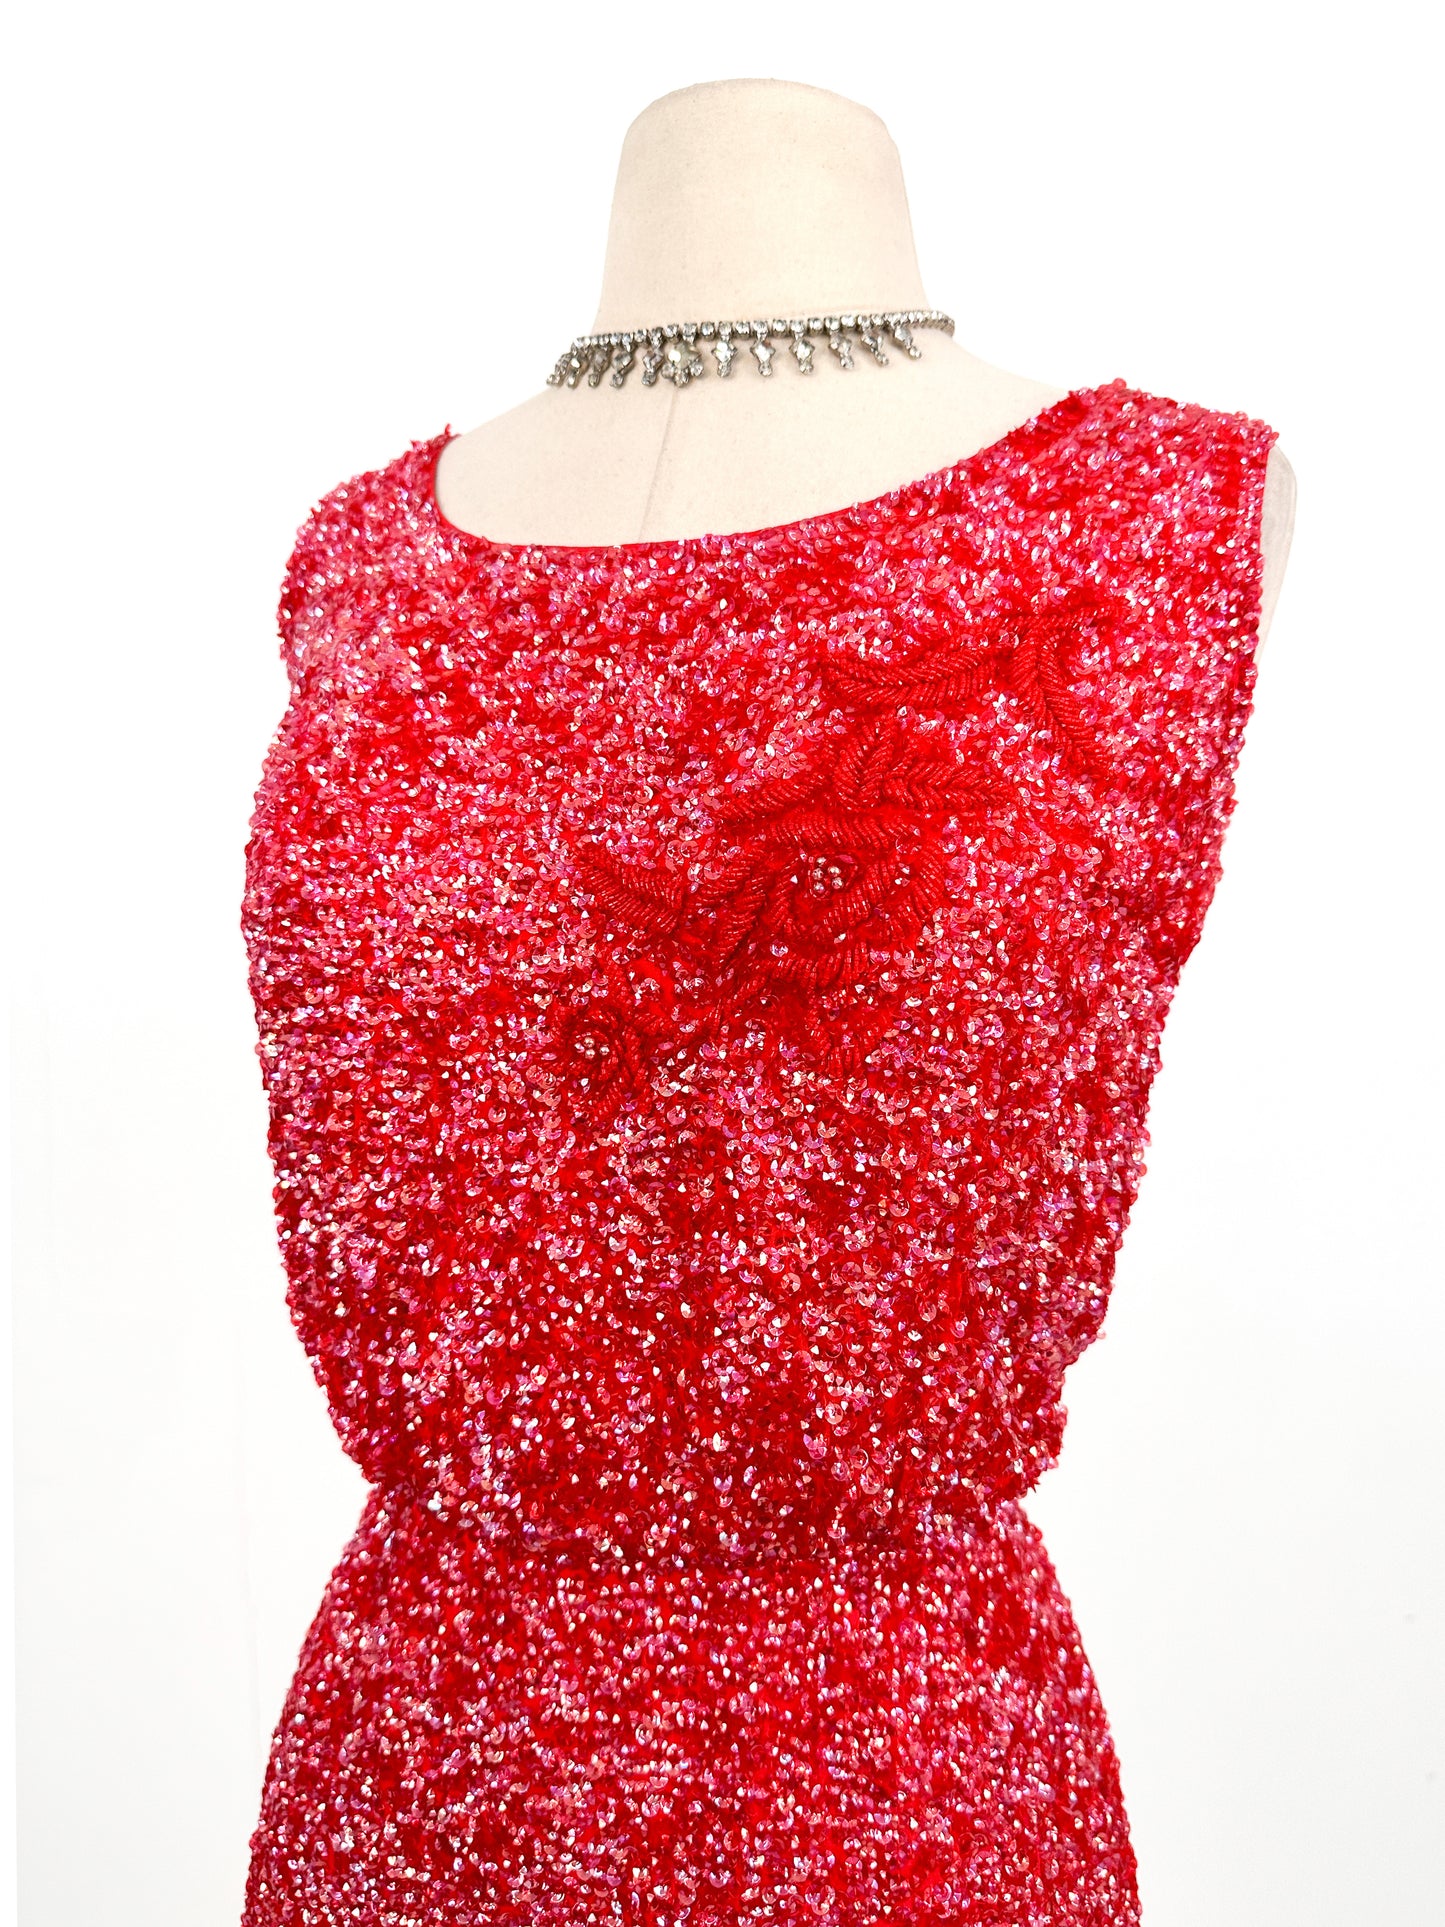 RARE 1950-60s Ruby Red Sequin Dress with Beaded Florals / Waist 30